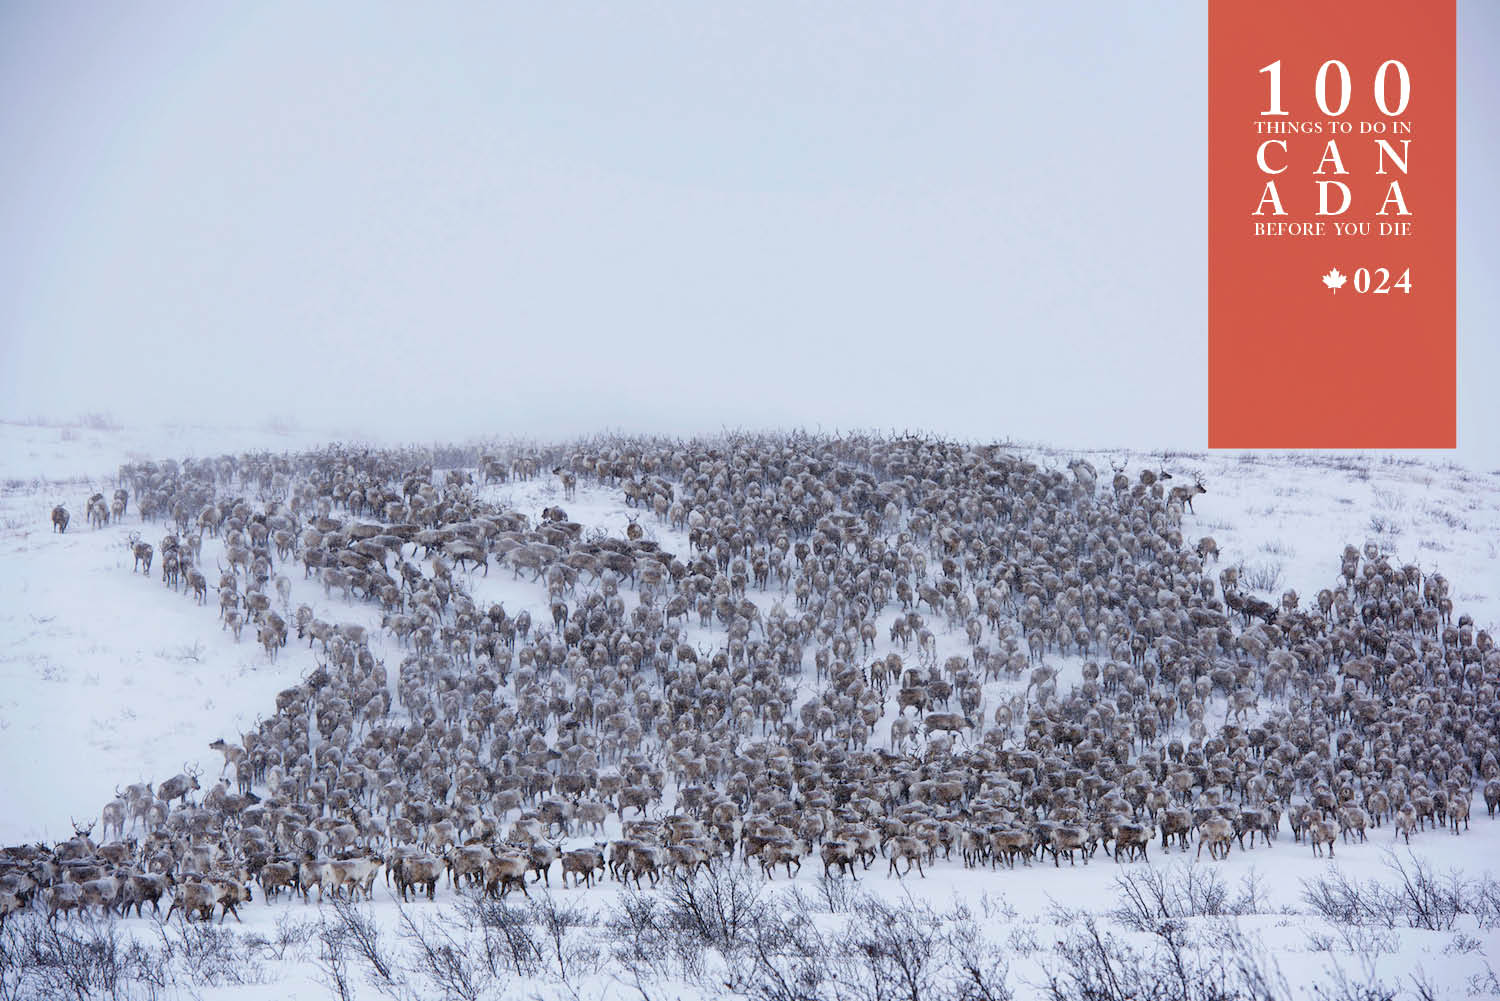 You're guaranteed to be in awe of Canada's mass reindeer migration